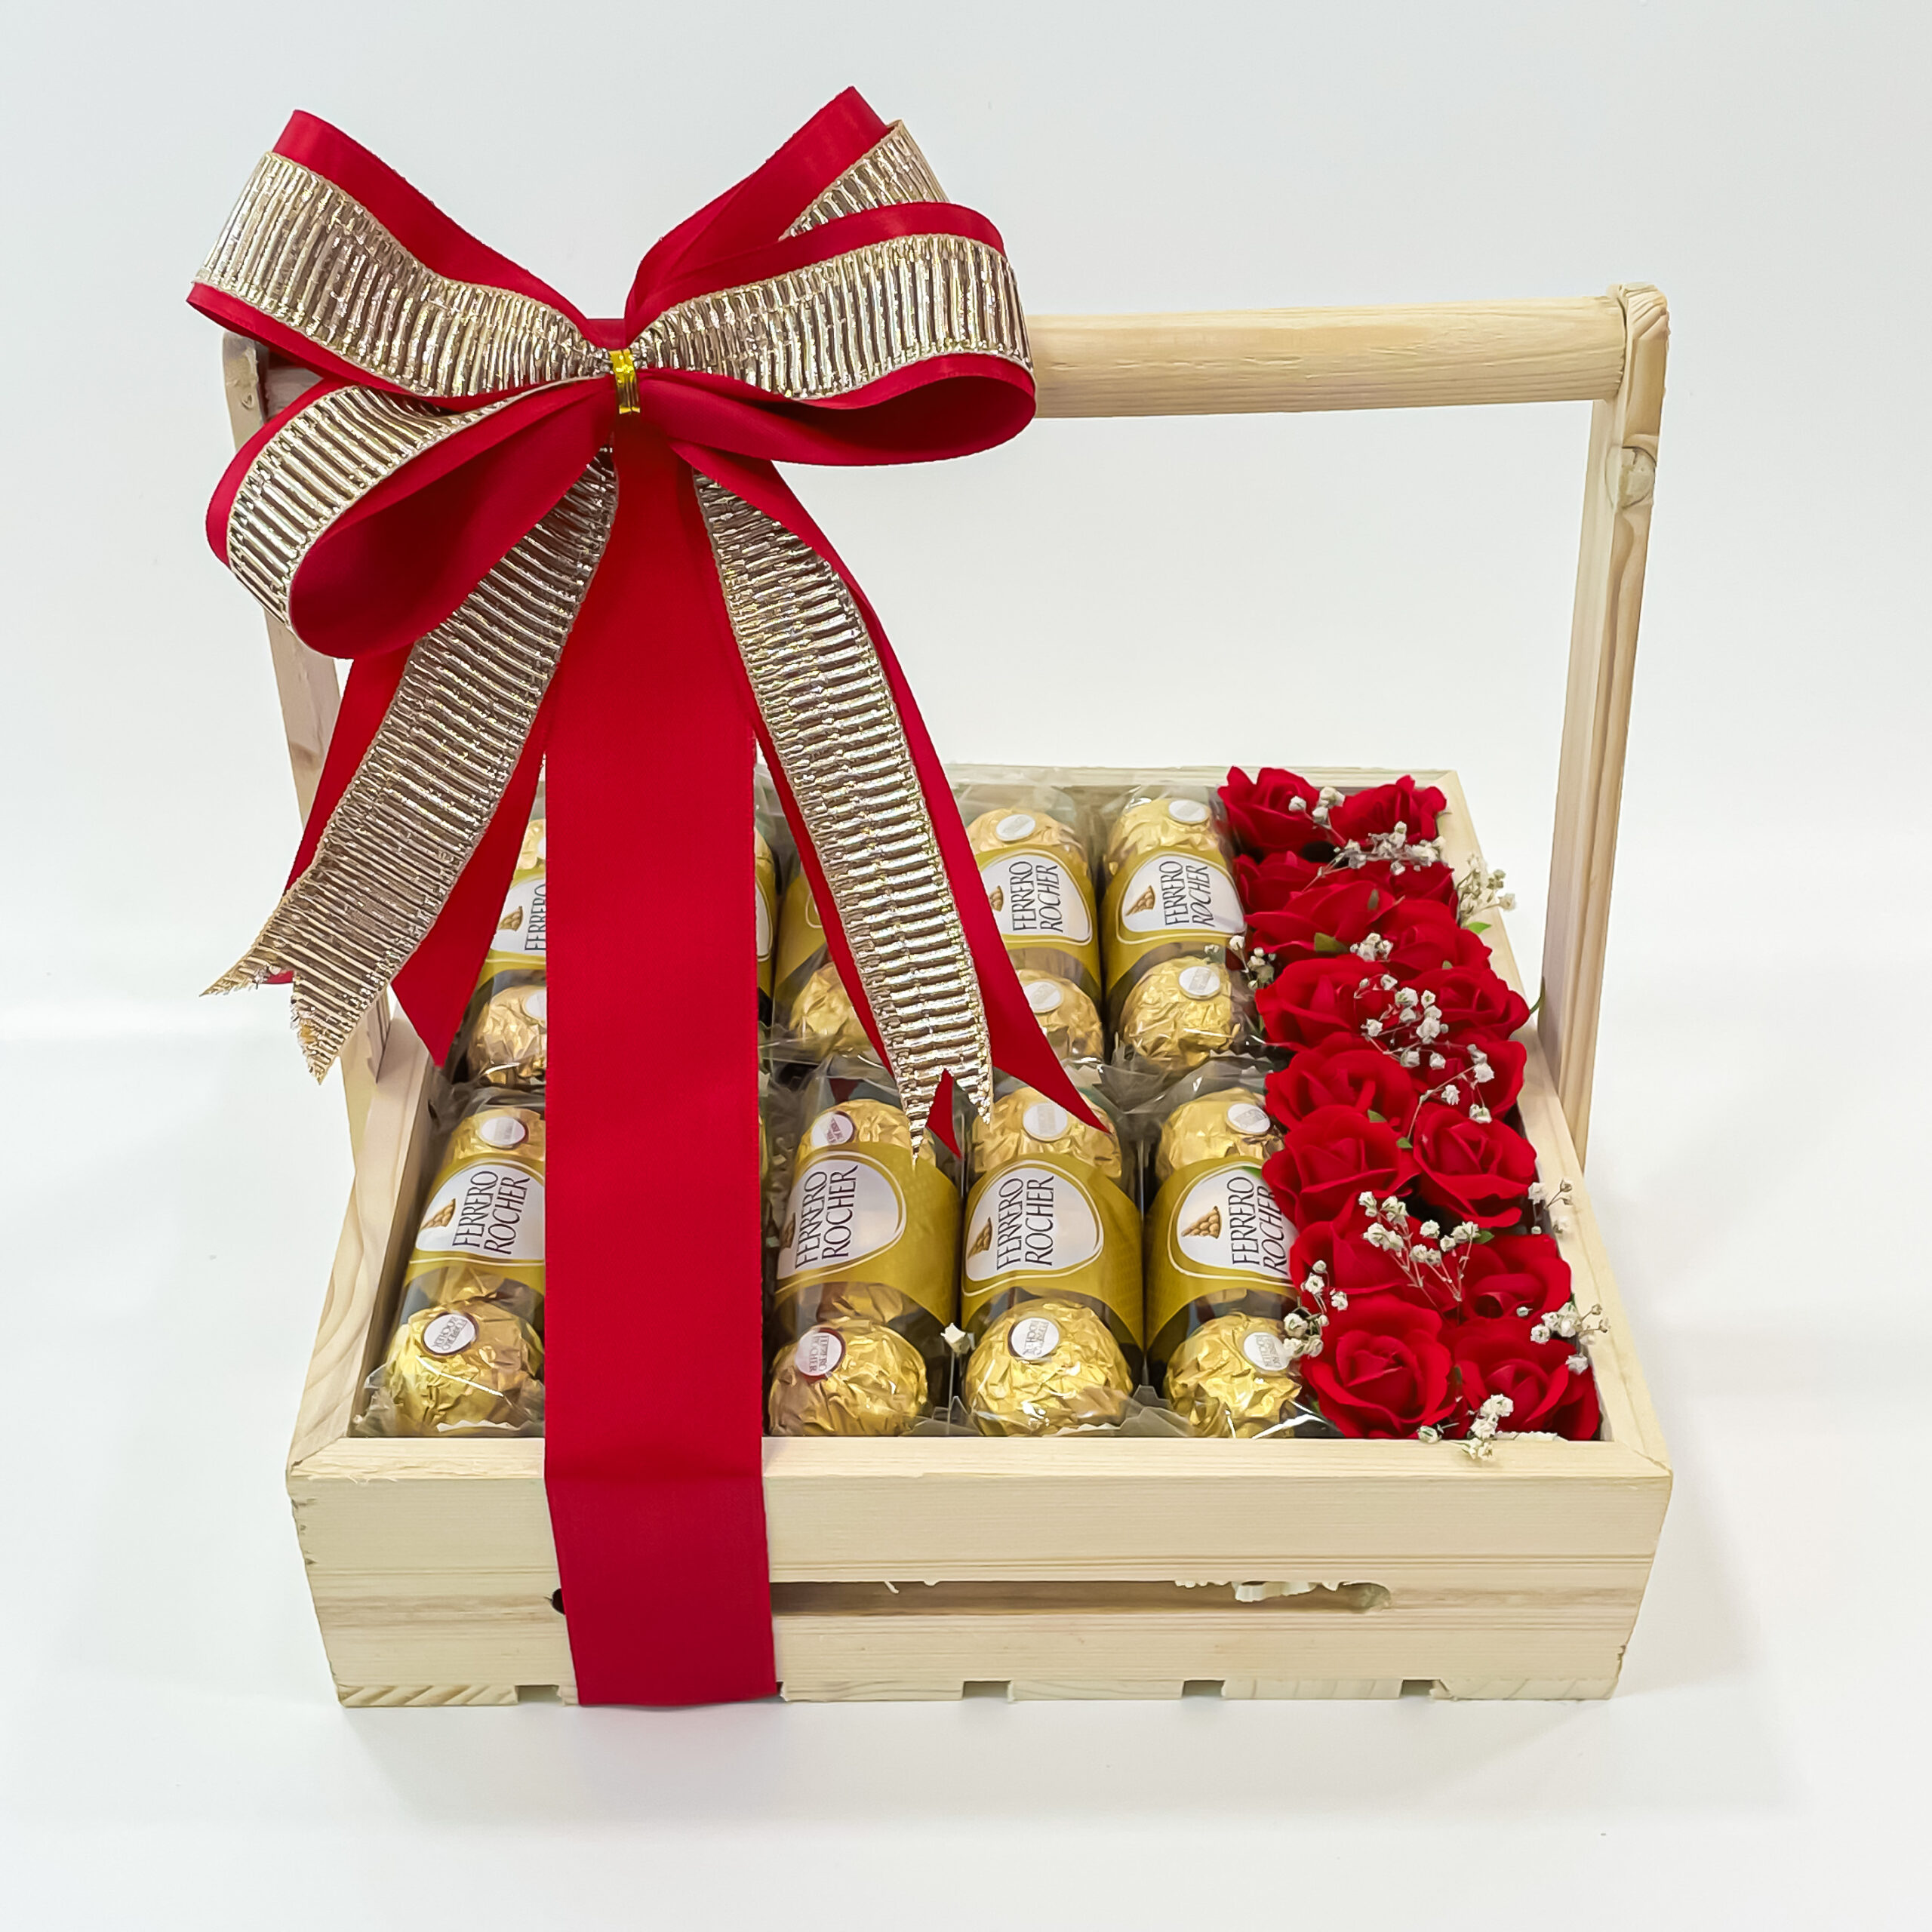 All About Chocolates - Butlers, Ferrero Rocher, Lindt, & More – The Gift  Studio